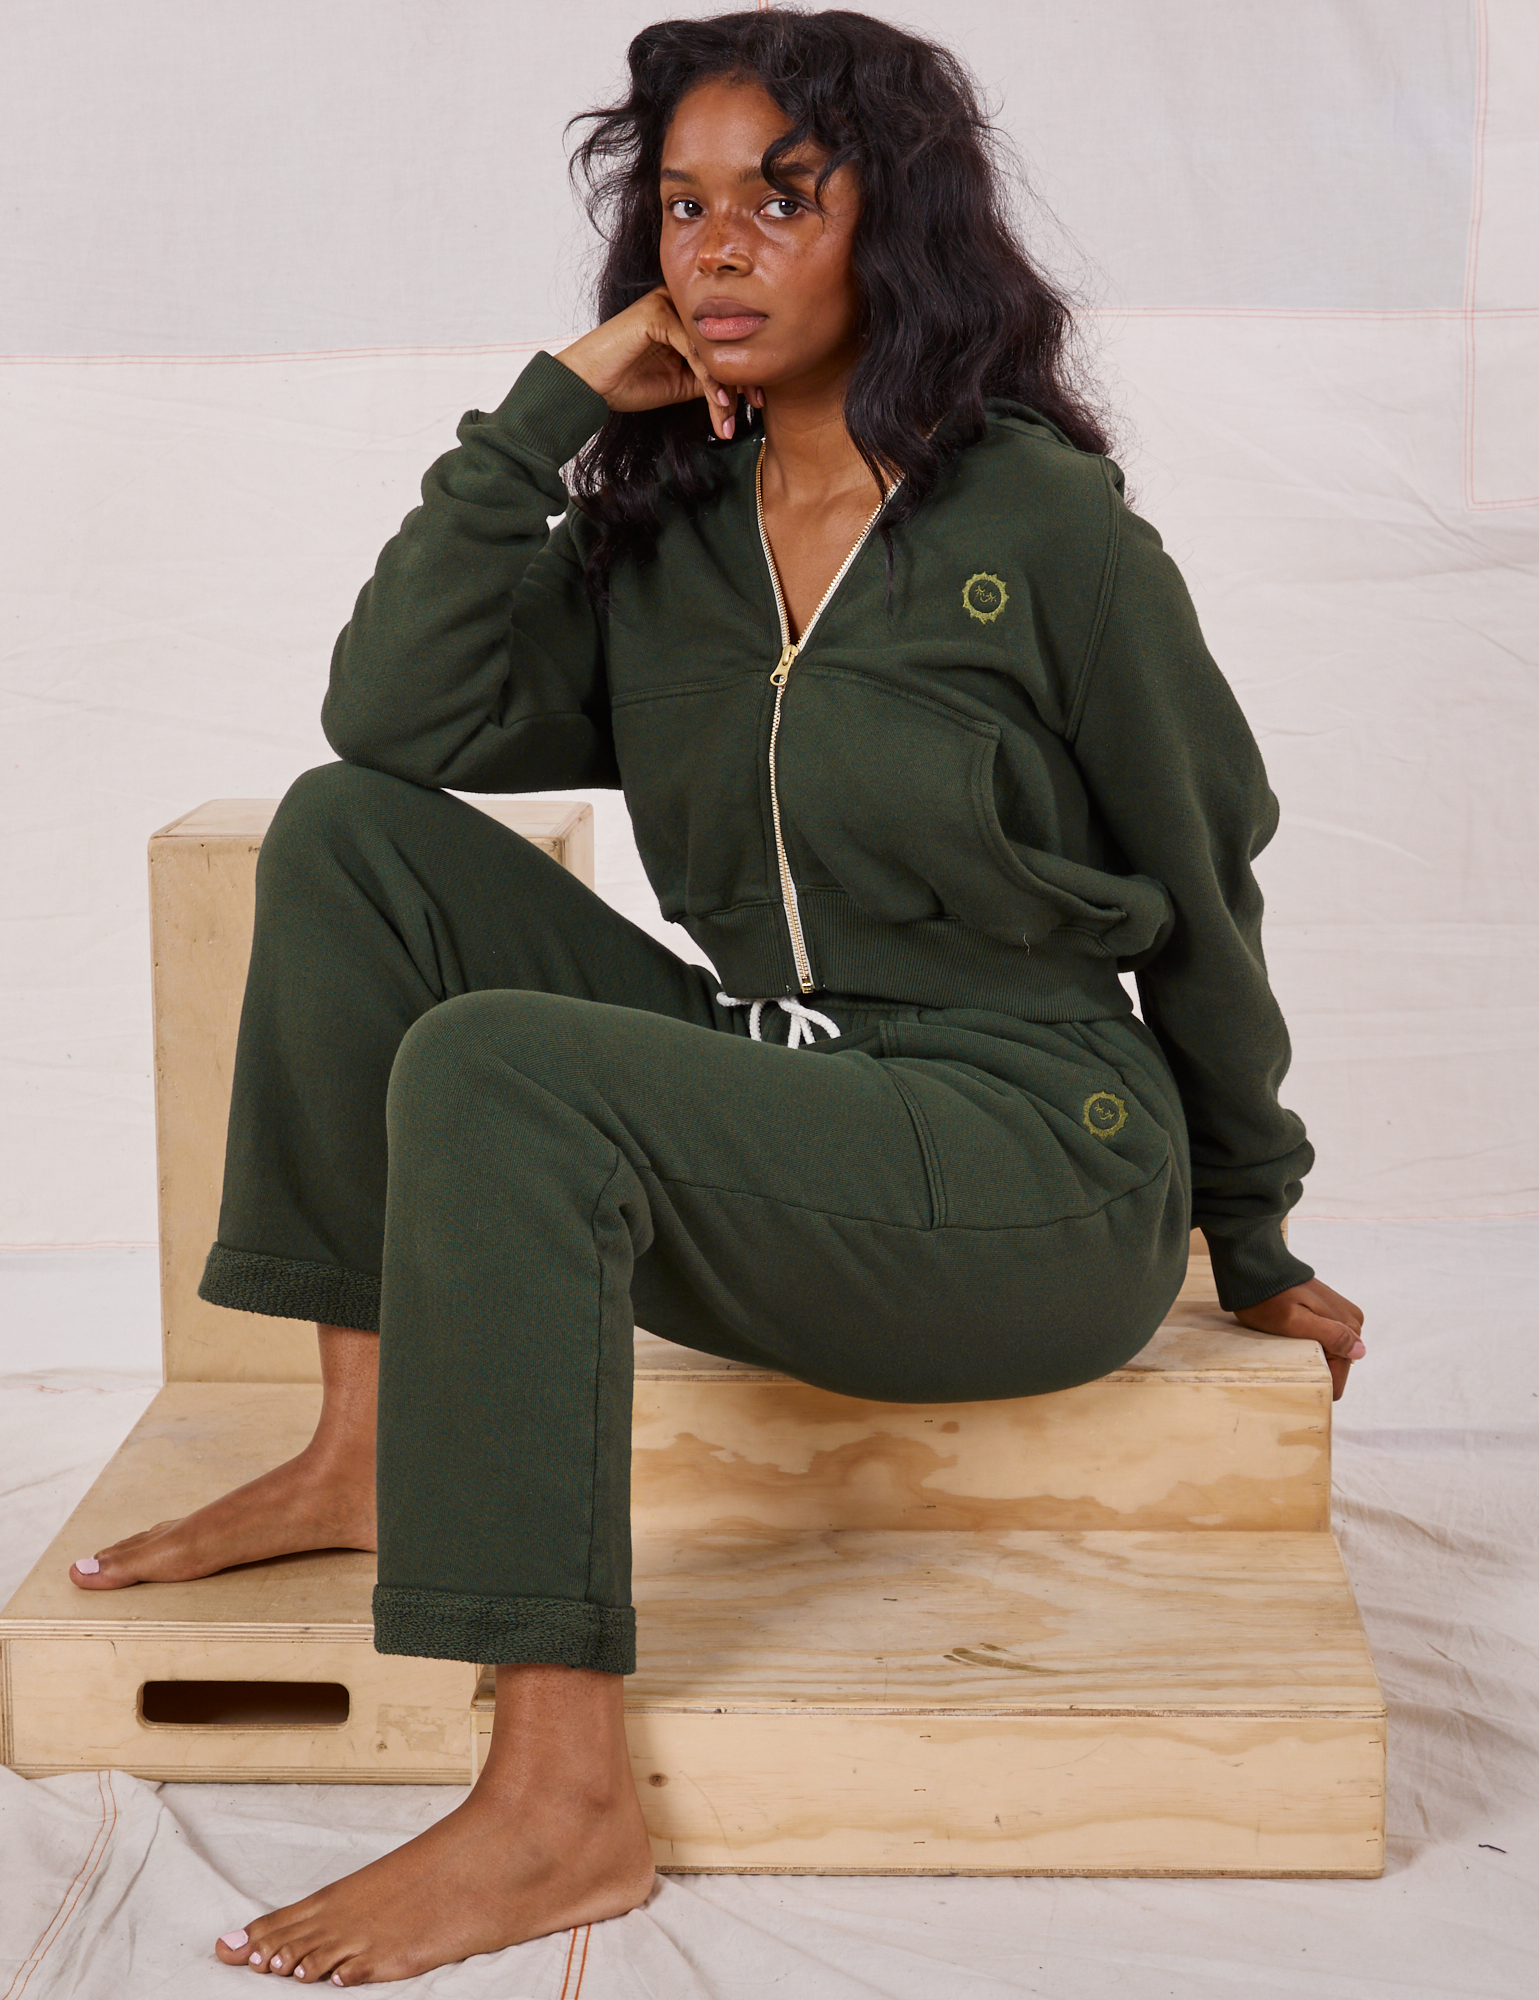 Cropped Zip Hoodie in Swamp Green and matching Rolled Cuff Sweat Pants worn by Kandia